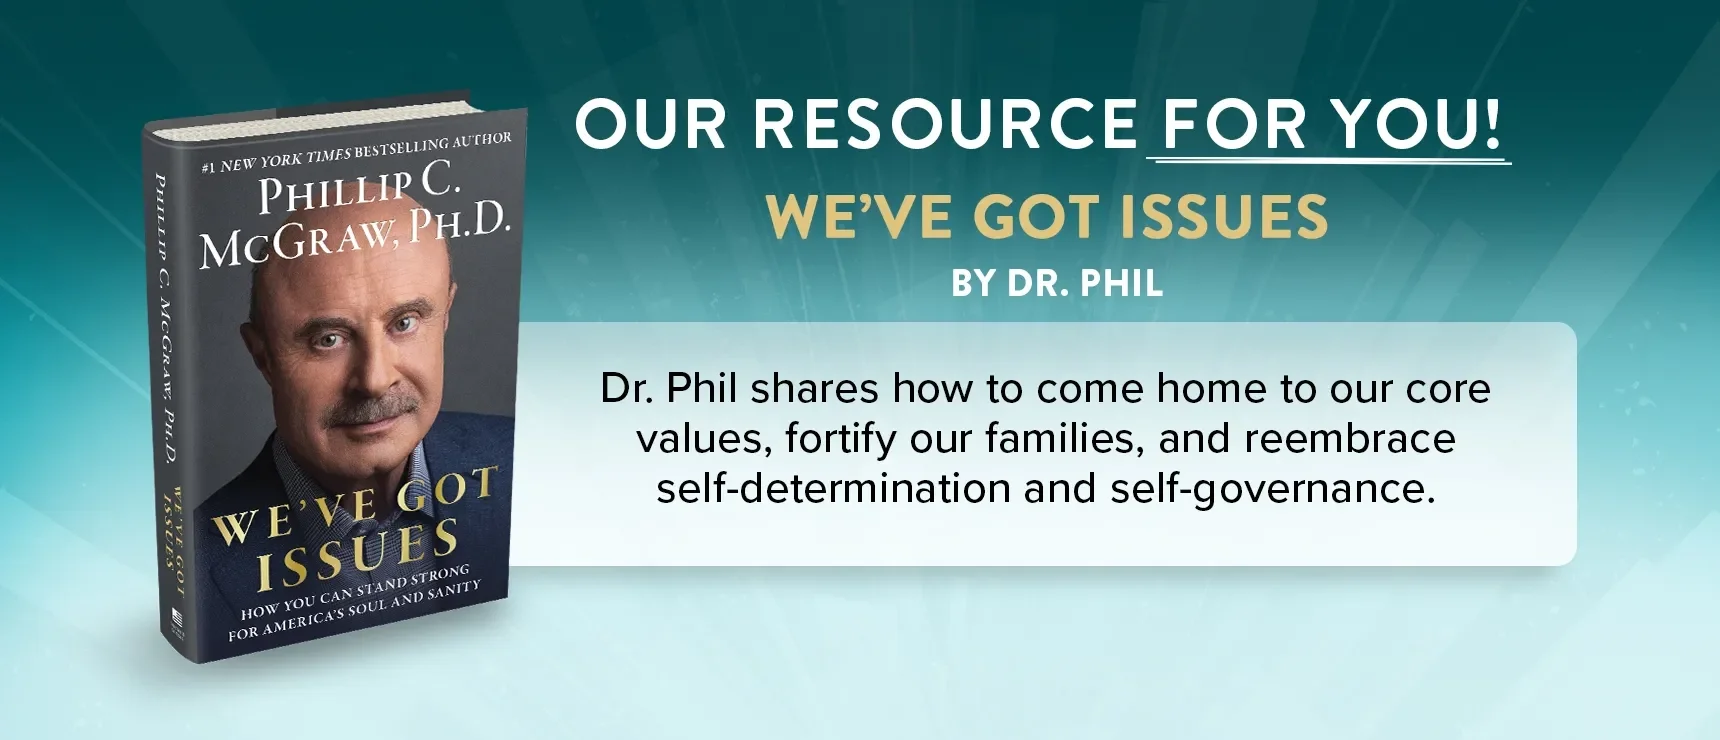 We've Got Issues by Dr. Phil